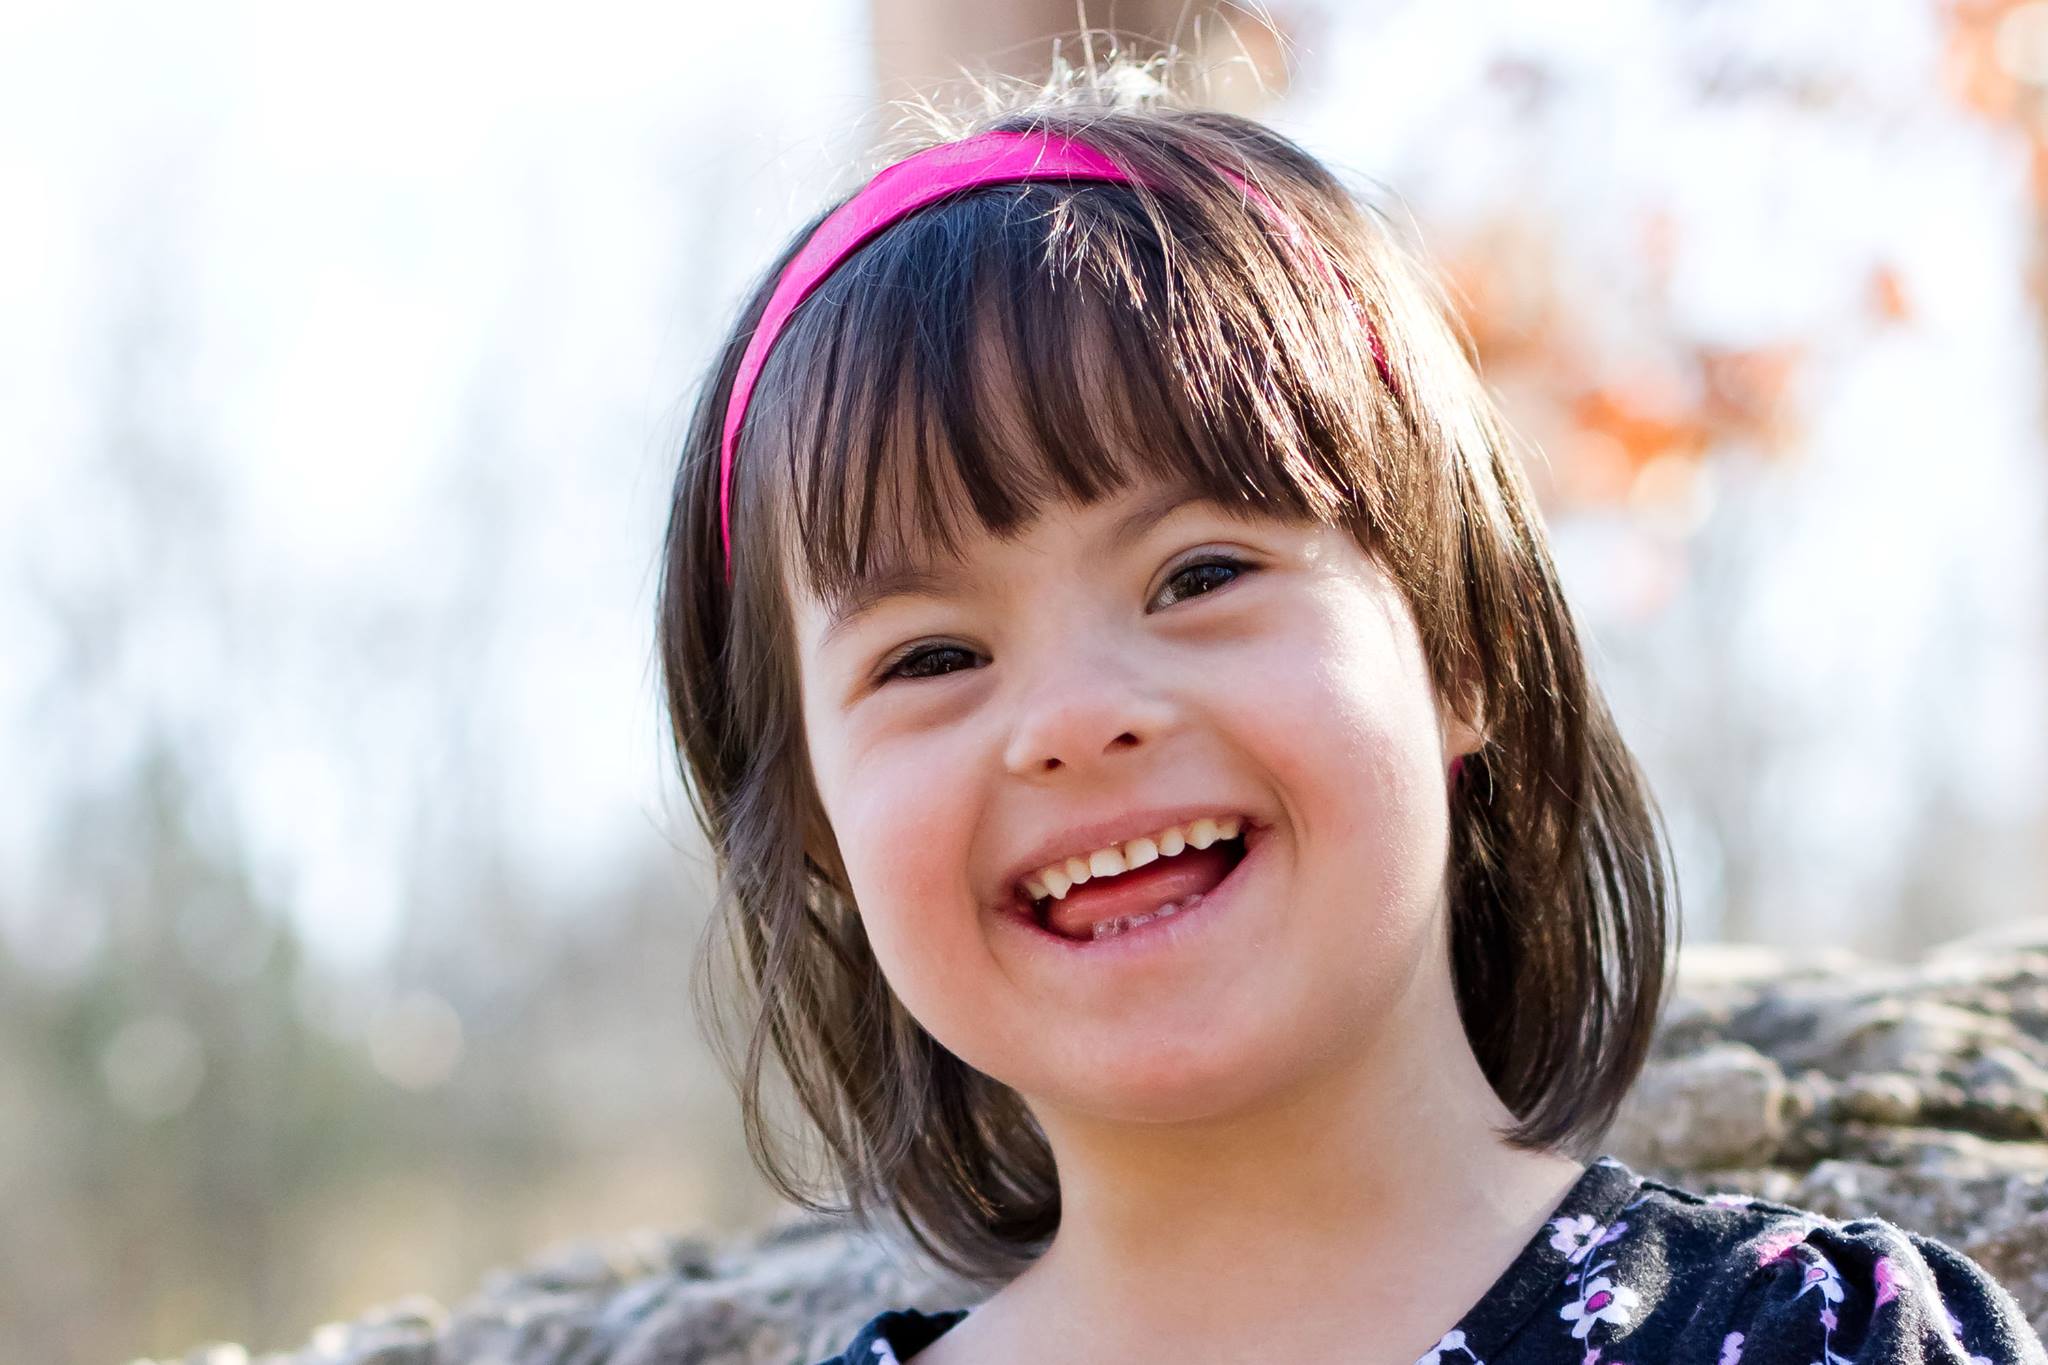 down-syndrome-the-stereotypes-the-joys-the-facts-podcast-ellen